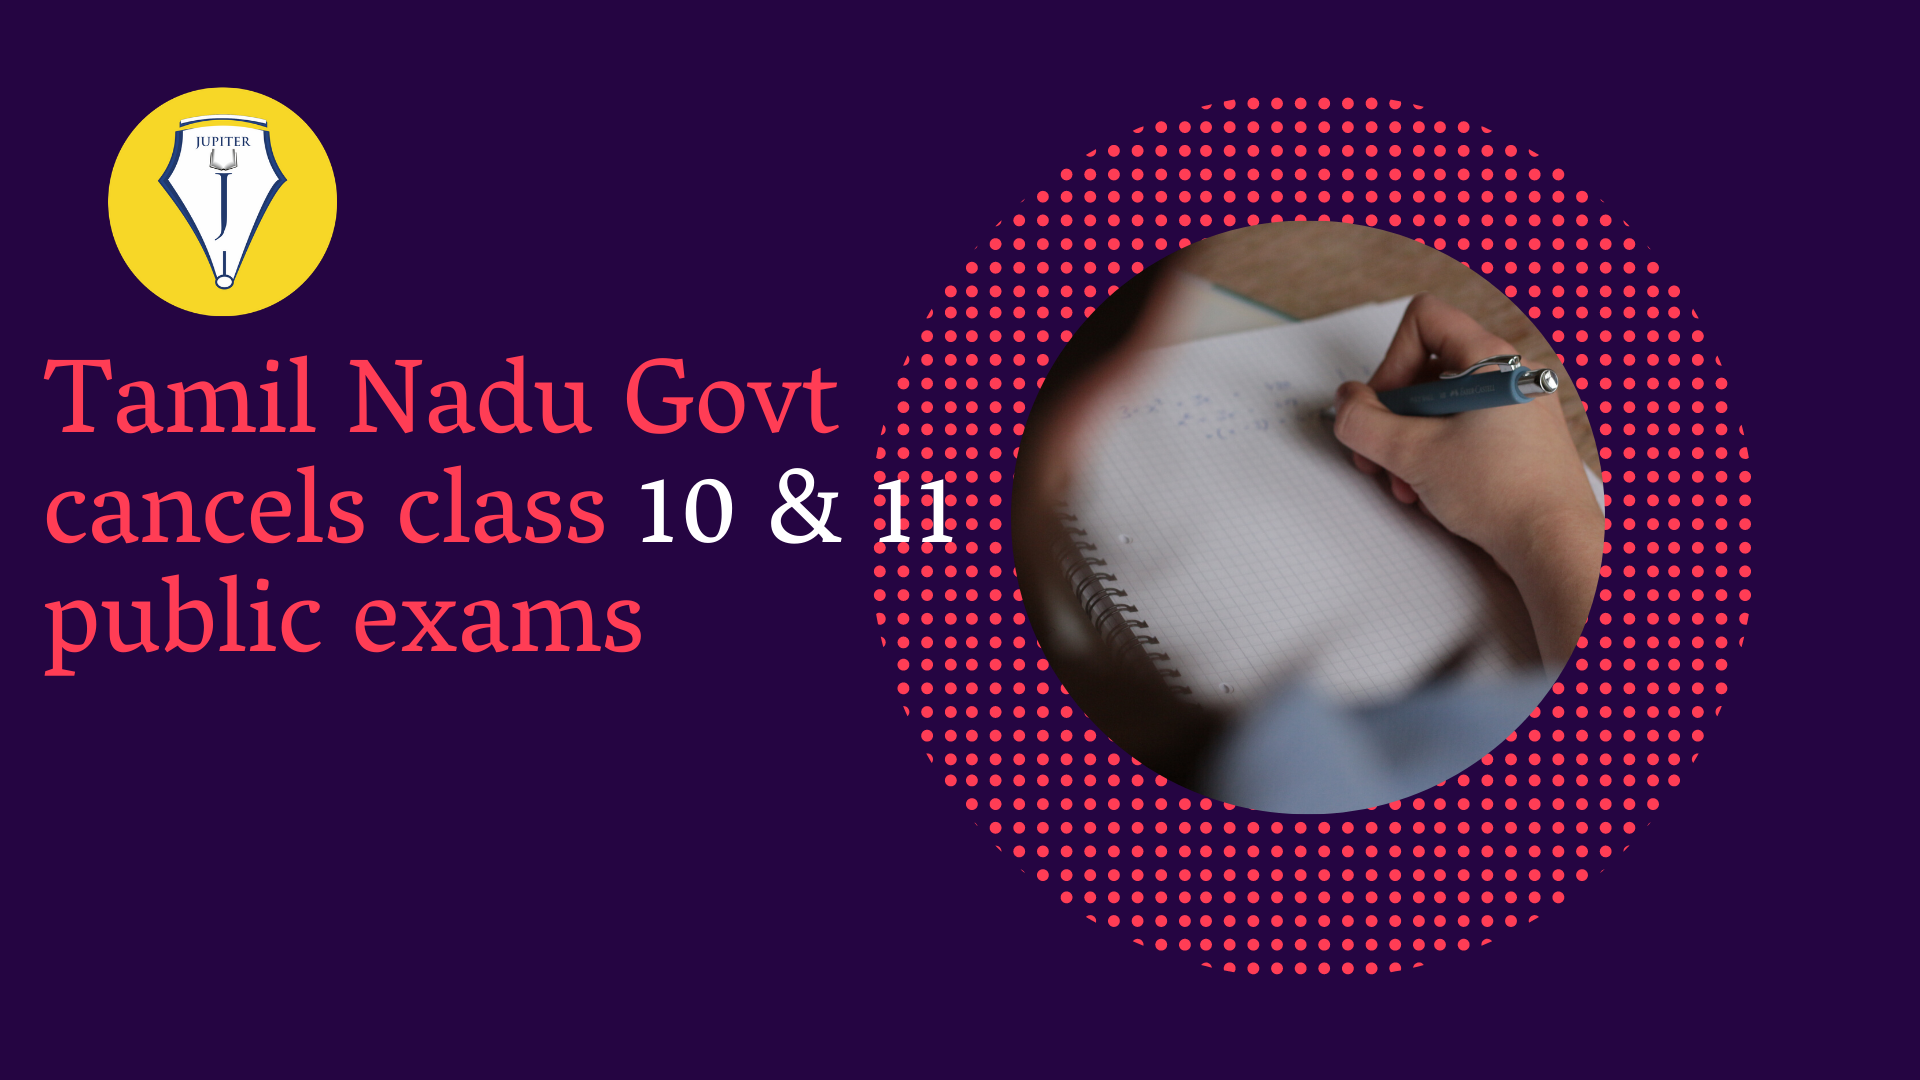 You are currently viewing Tamil Nadu Govt cancels class 10 & 11 public exams